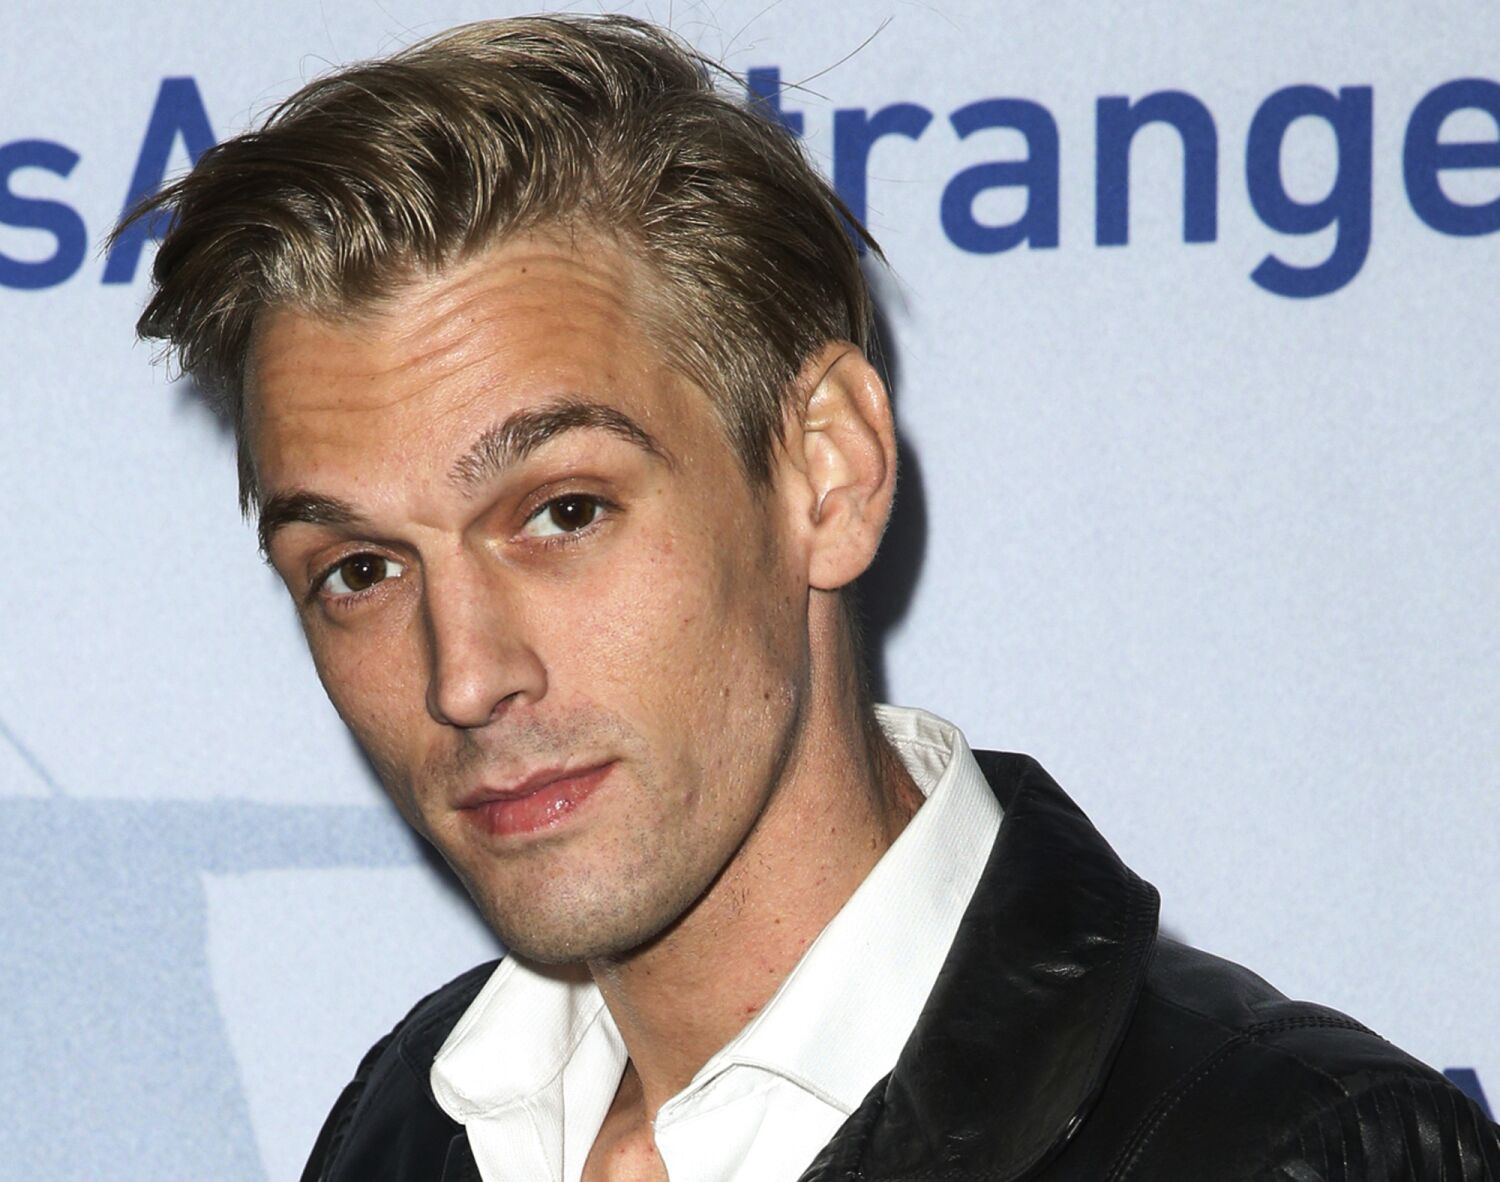 Aaron Carter's fans disappointed by In Memoriam omission during Grammys telecast